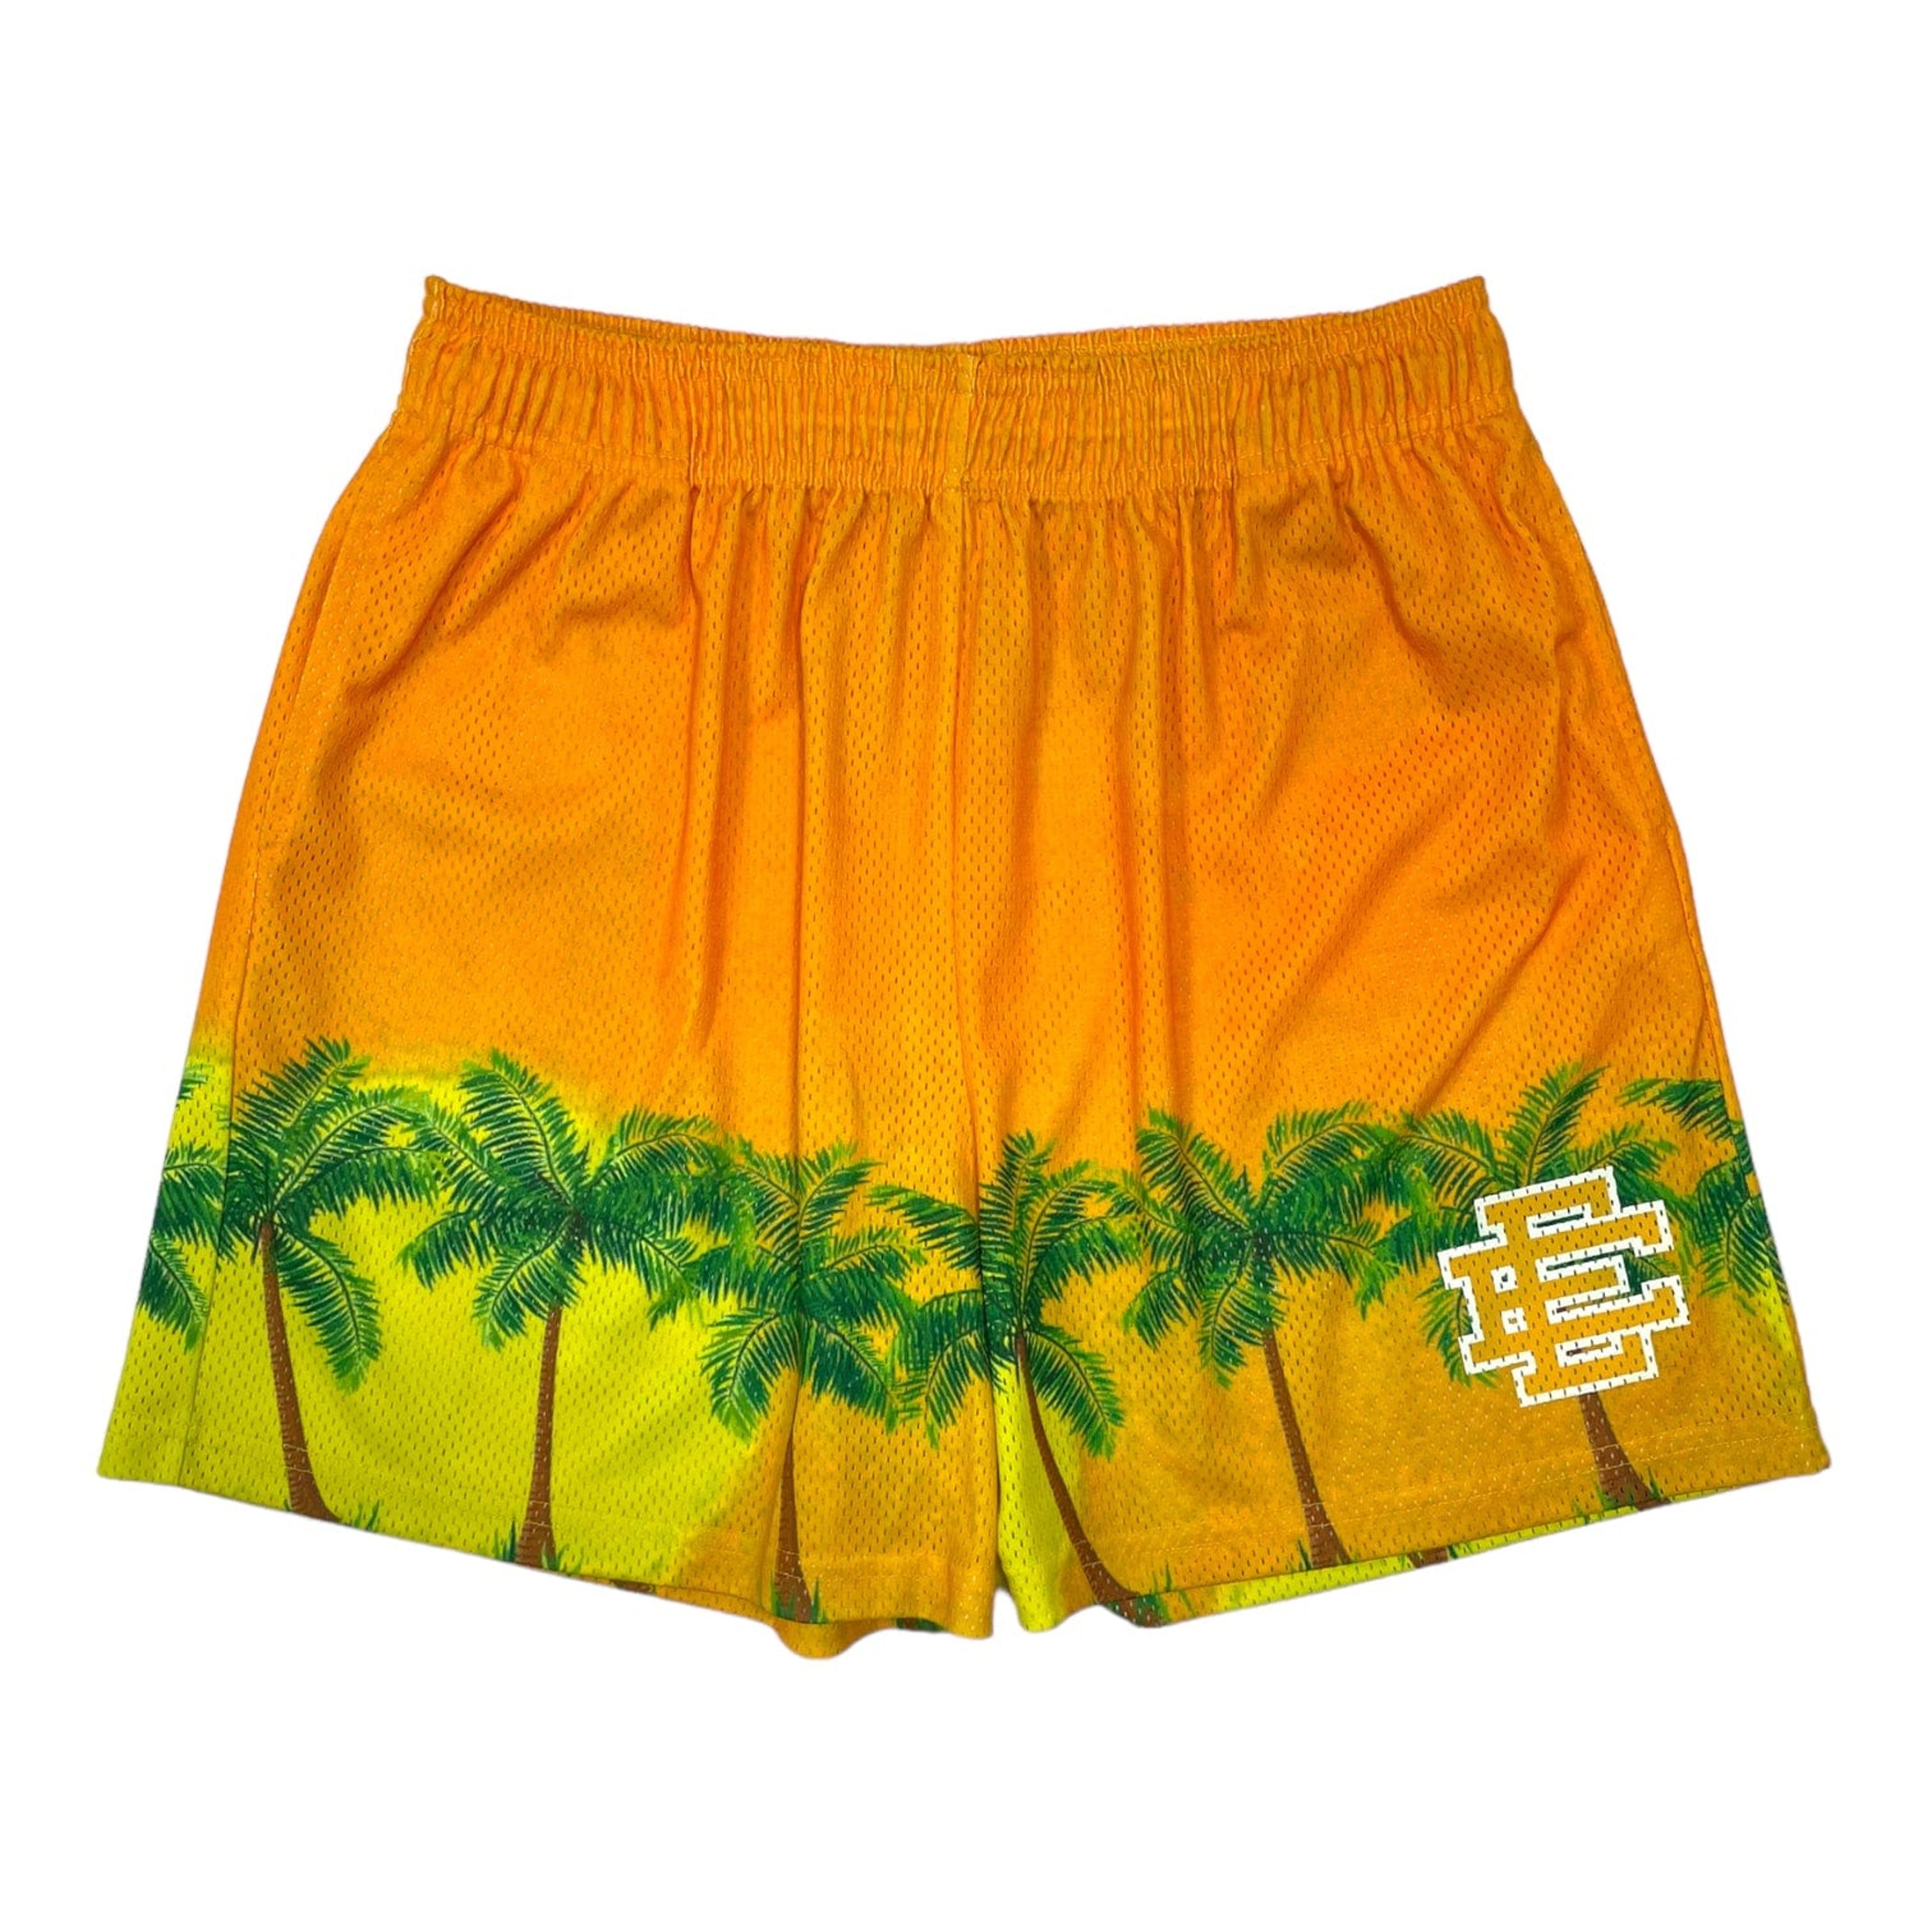 Eric Emanuel EE Basic Shorts Gold Palm Pre-Owned